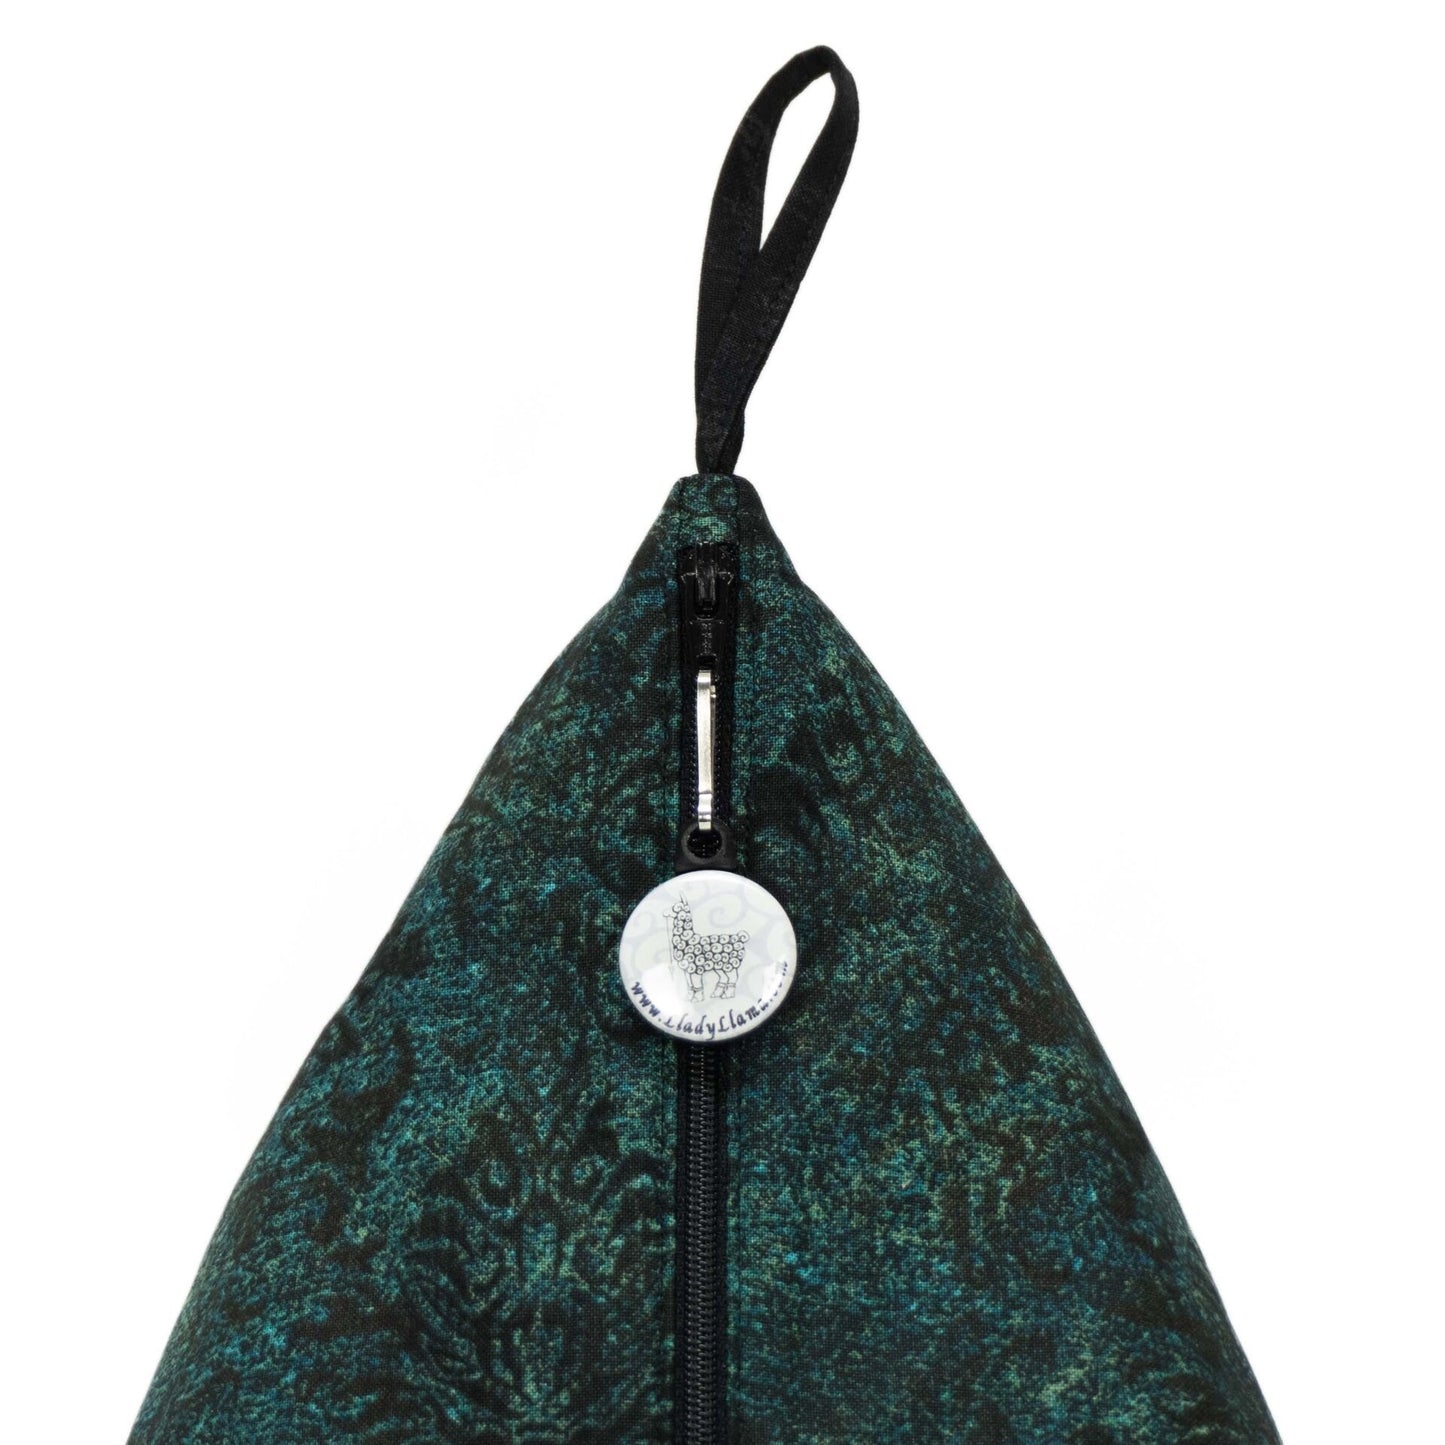 Dark Teal Damask - Llexical Notions Pouch - Knitting, Crochet, Spinning Accessory Bag